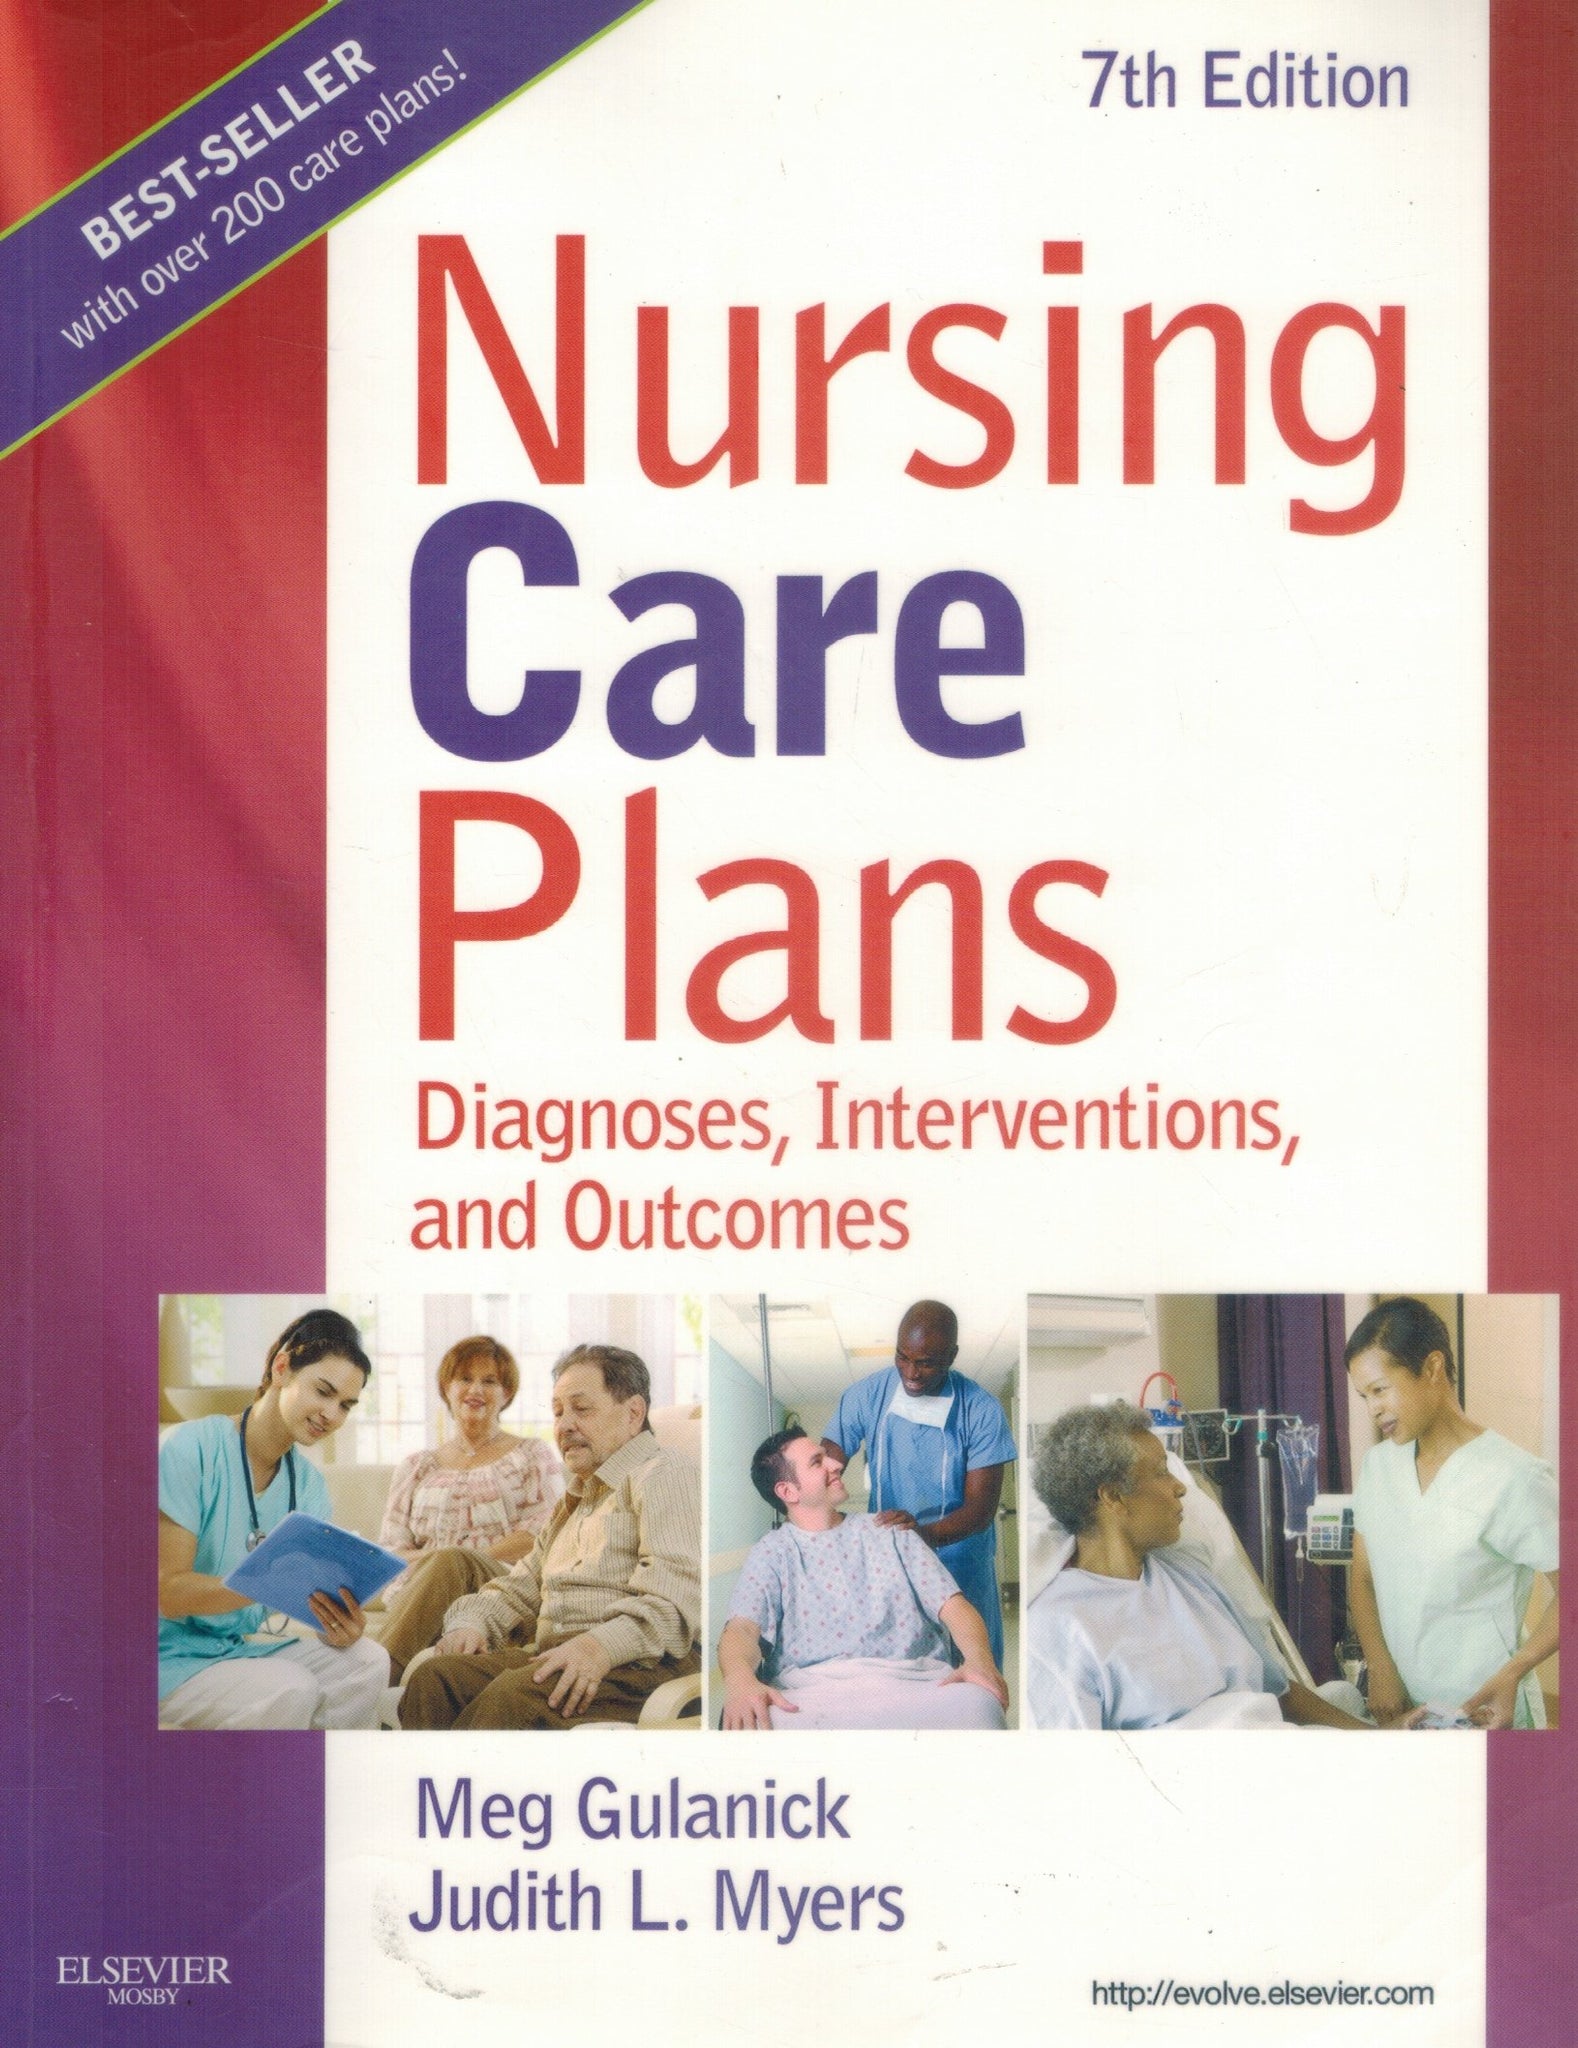 Nursing Care Plans  Diagnoses, Interventions, and Outcomes